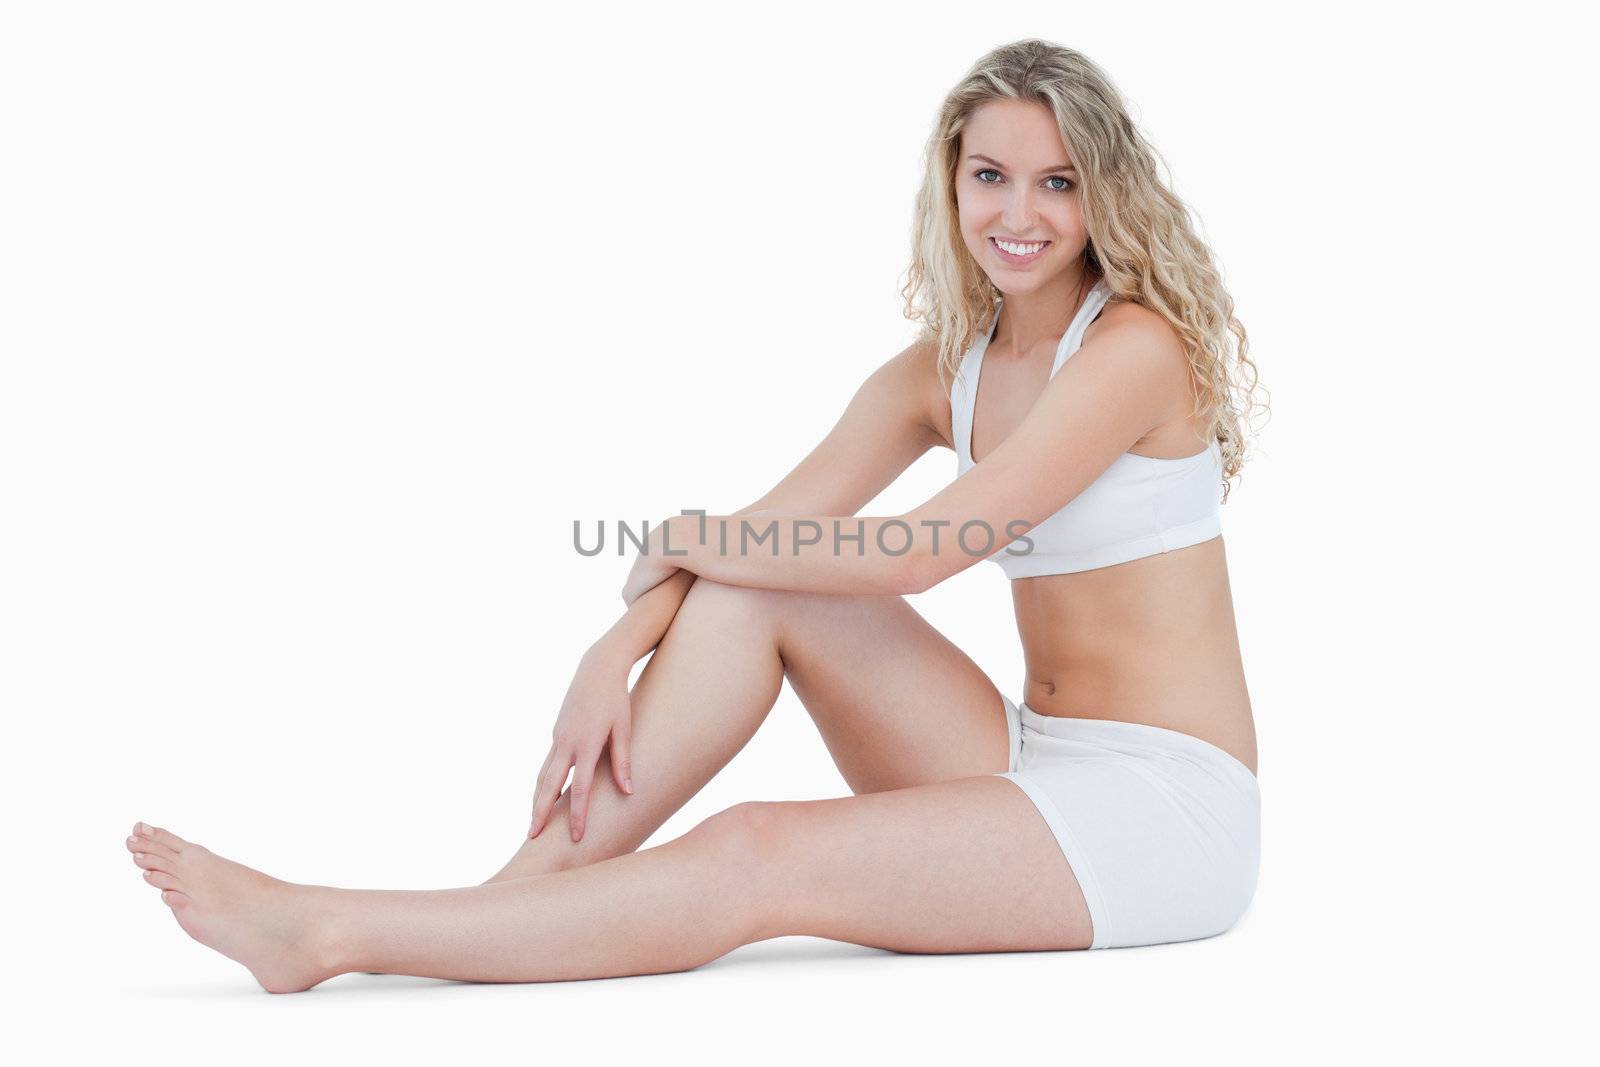 Smiling teenage sitting on the floor in underwear against a white background